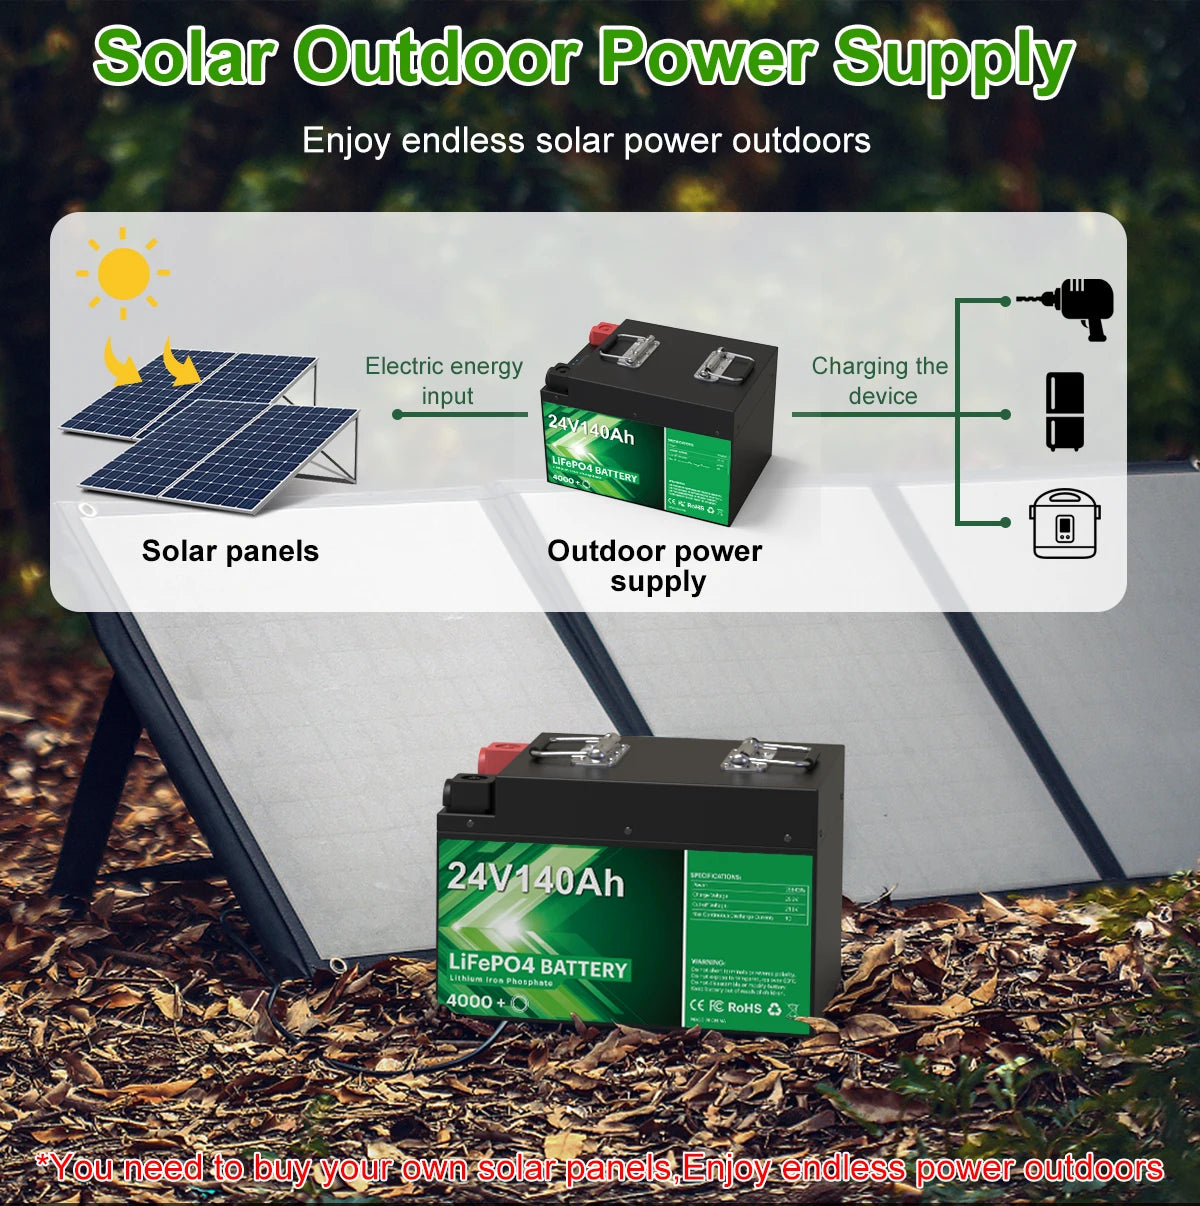 24V 140Ah 100Ah LiFePO4 Battery, Solar-powered power system with built-in panels and battery pack for effortless charging and recharging.